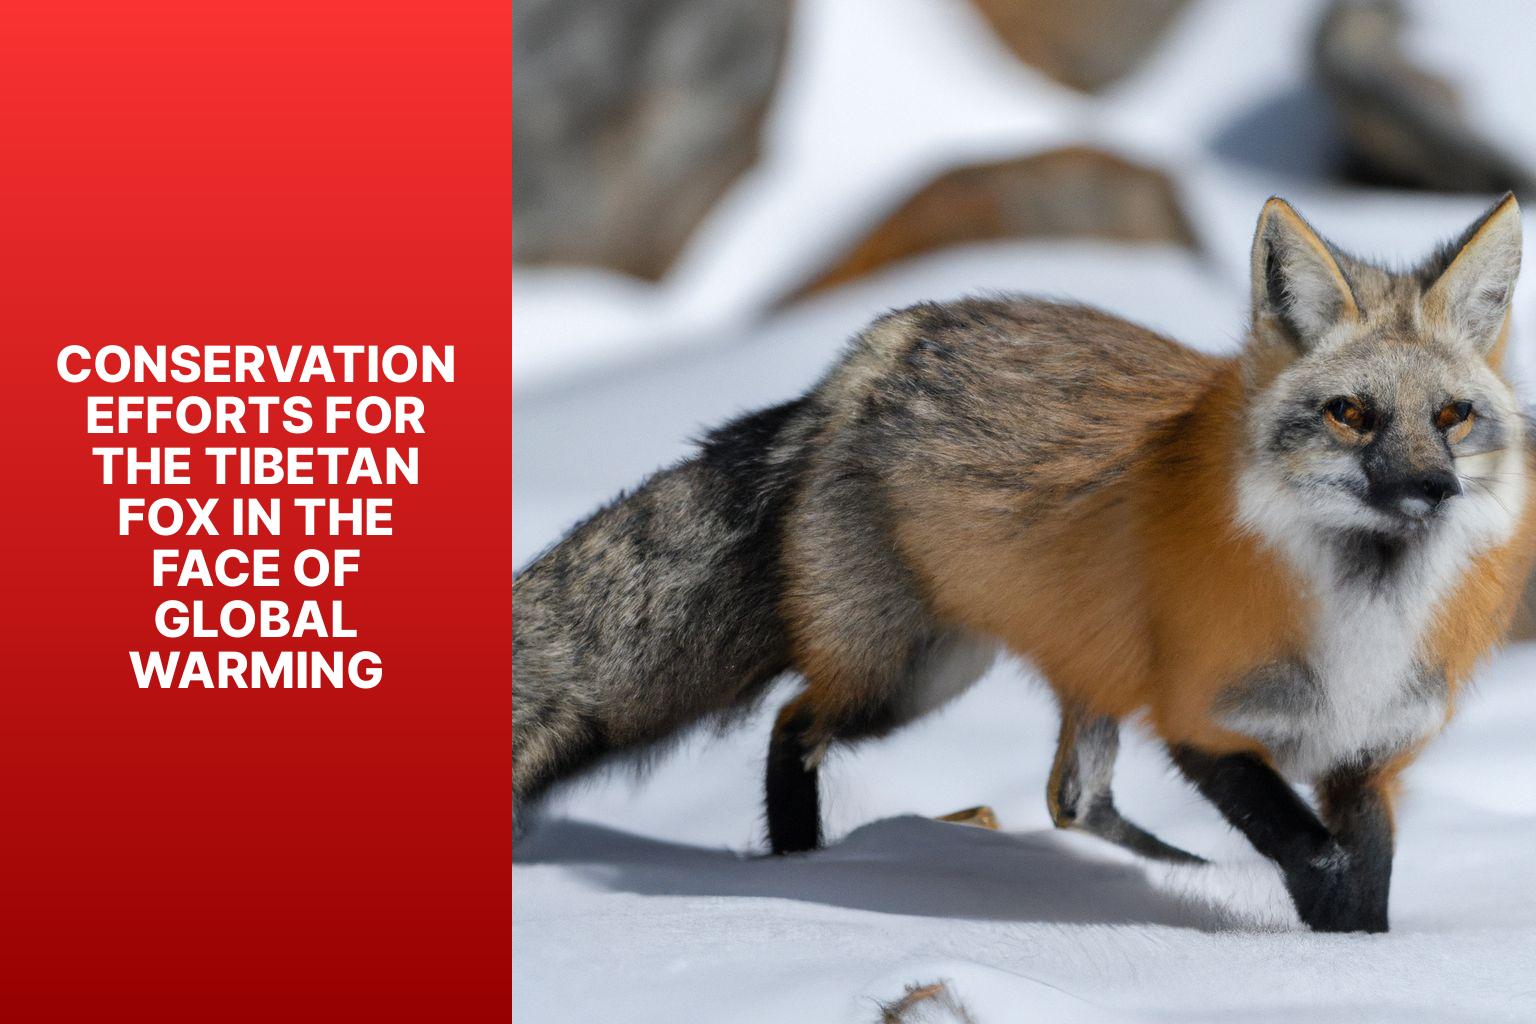 Conservation Efforts for the Tibetan Fox in the Face of Global Warming - Tibetan Fox in global warming 